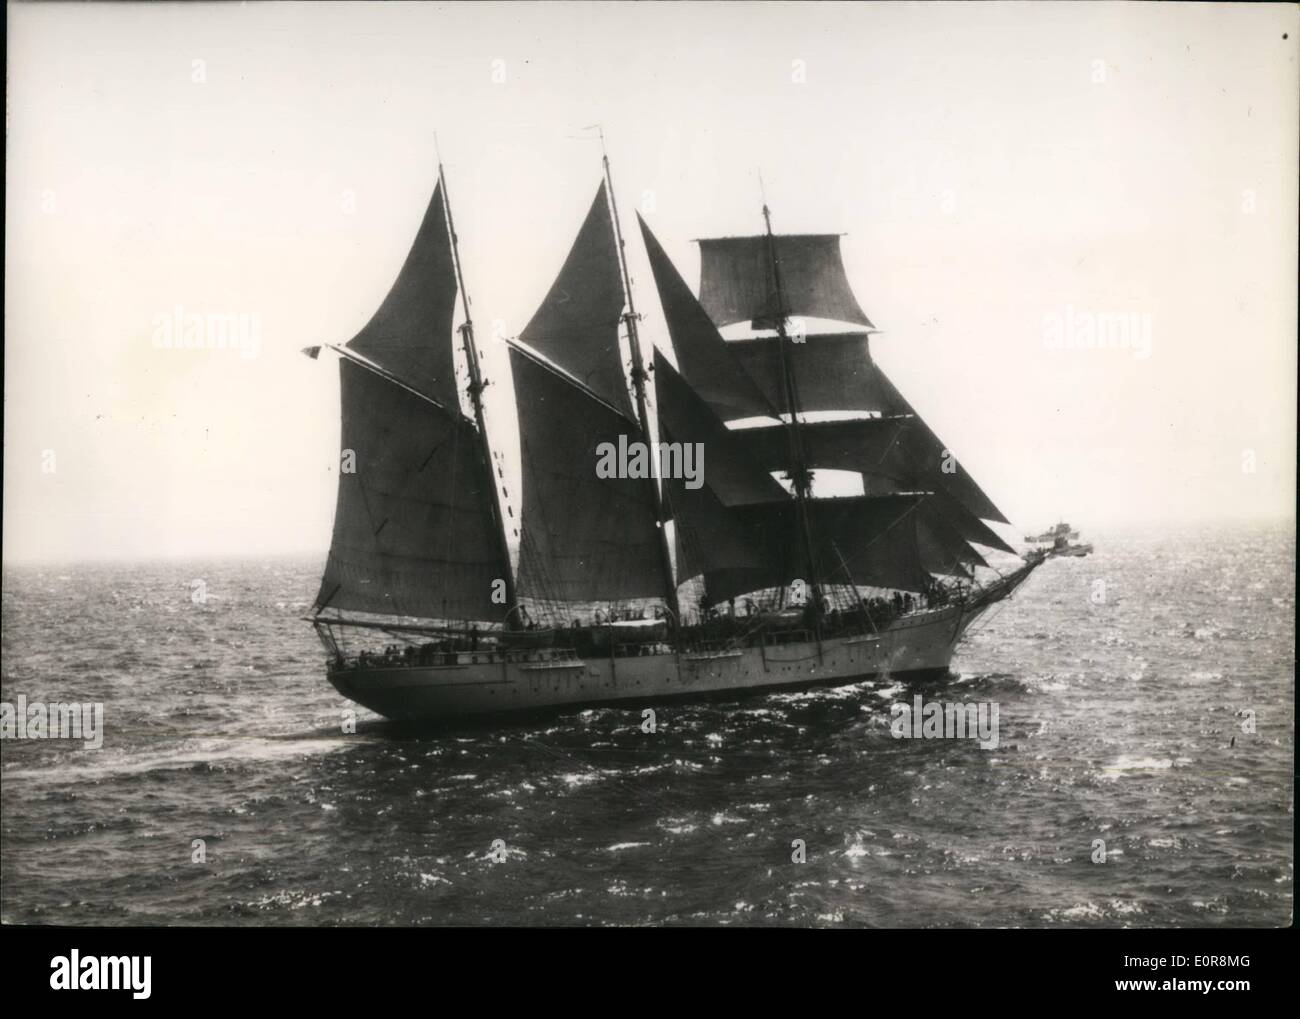 Aug. 08, 1958 - Shoolships in a Race Brest-Canary Islands: Schoolships of different nationalities are participating in a race from Brest to Canary Islands (1,390 miles). Photo shows The Swedish ship ''Flying Clipper'' at high seas. Stock Photo